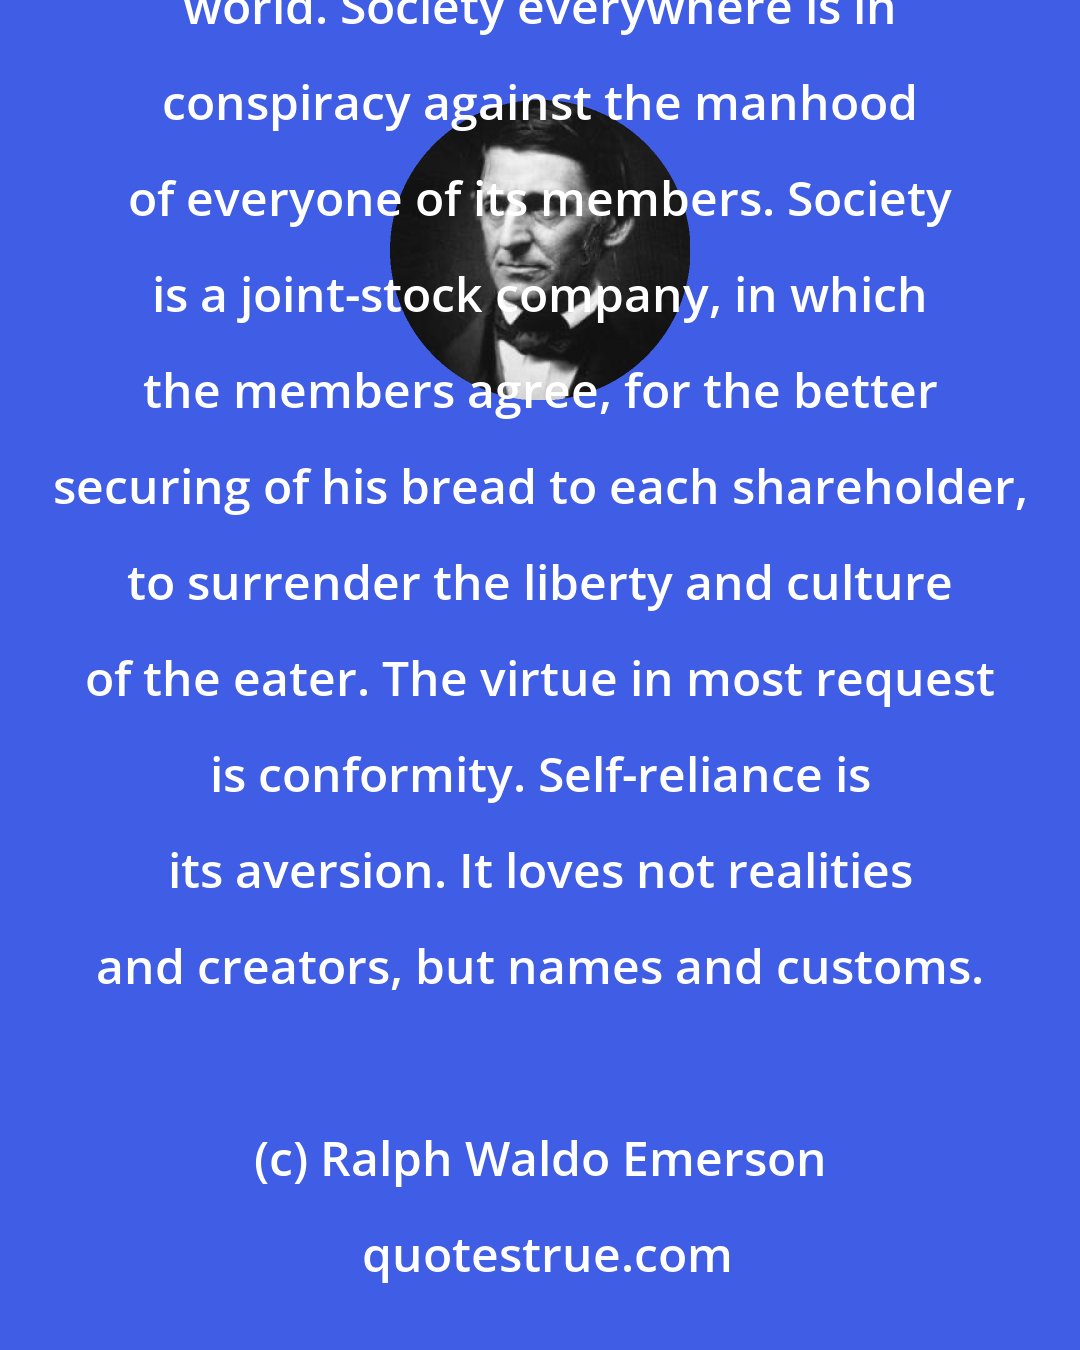 Ralph Waldo Emerson: These are the voices which we hear in solitude, but they grow faint and inaudible as we enter into the world. Society everywhere is in conspiracy against the manhood of everyone of its members. Society is a joint-stock company, in which the members agree, for the better securing of his bread to each shareholder, to surrender the liberty and culture of the eater. The virtue in most request is conformity. Self-reliance is its aversion. It loves not realities and creators, but names and customs.